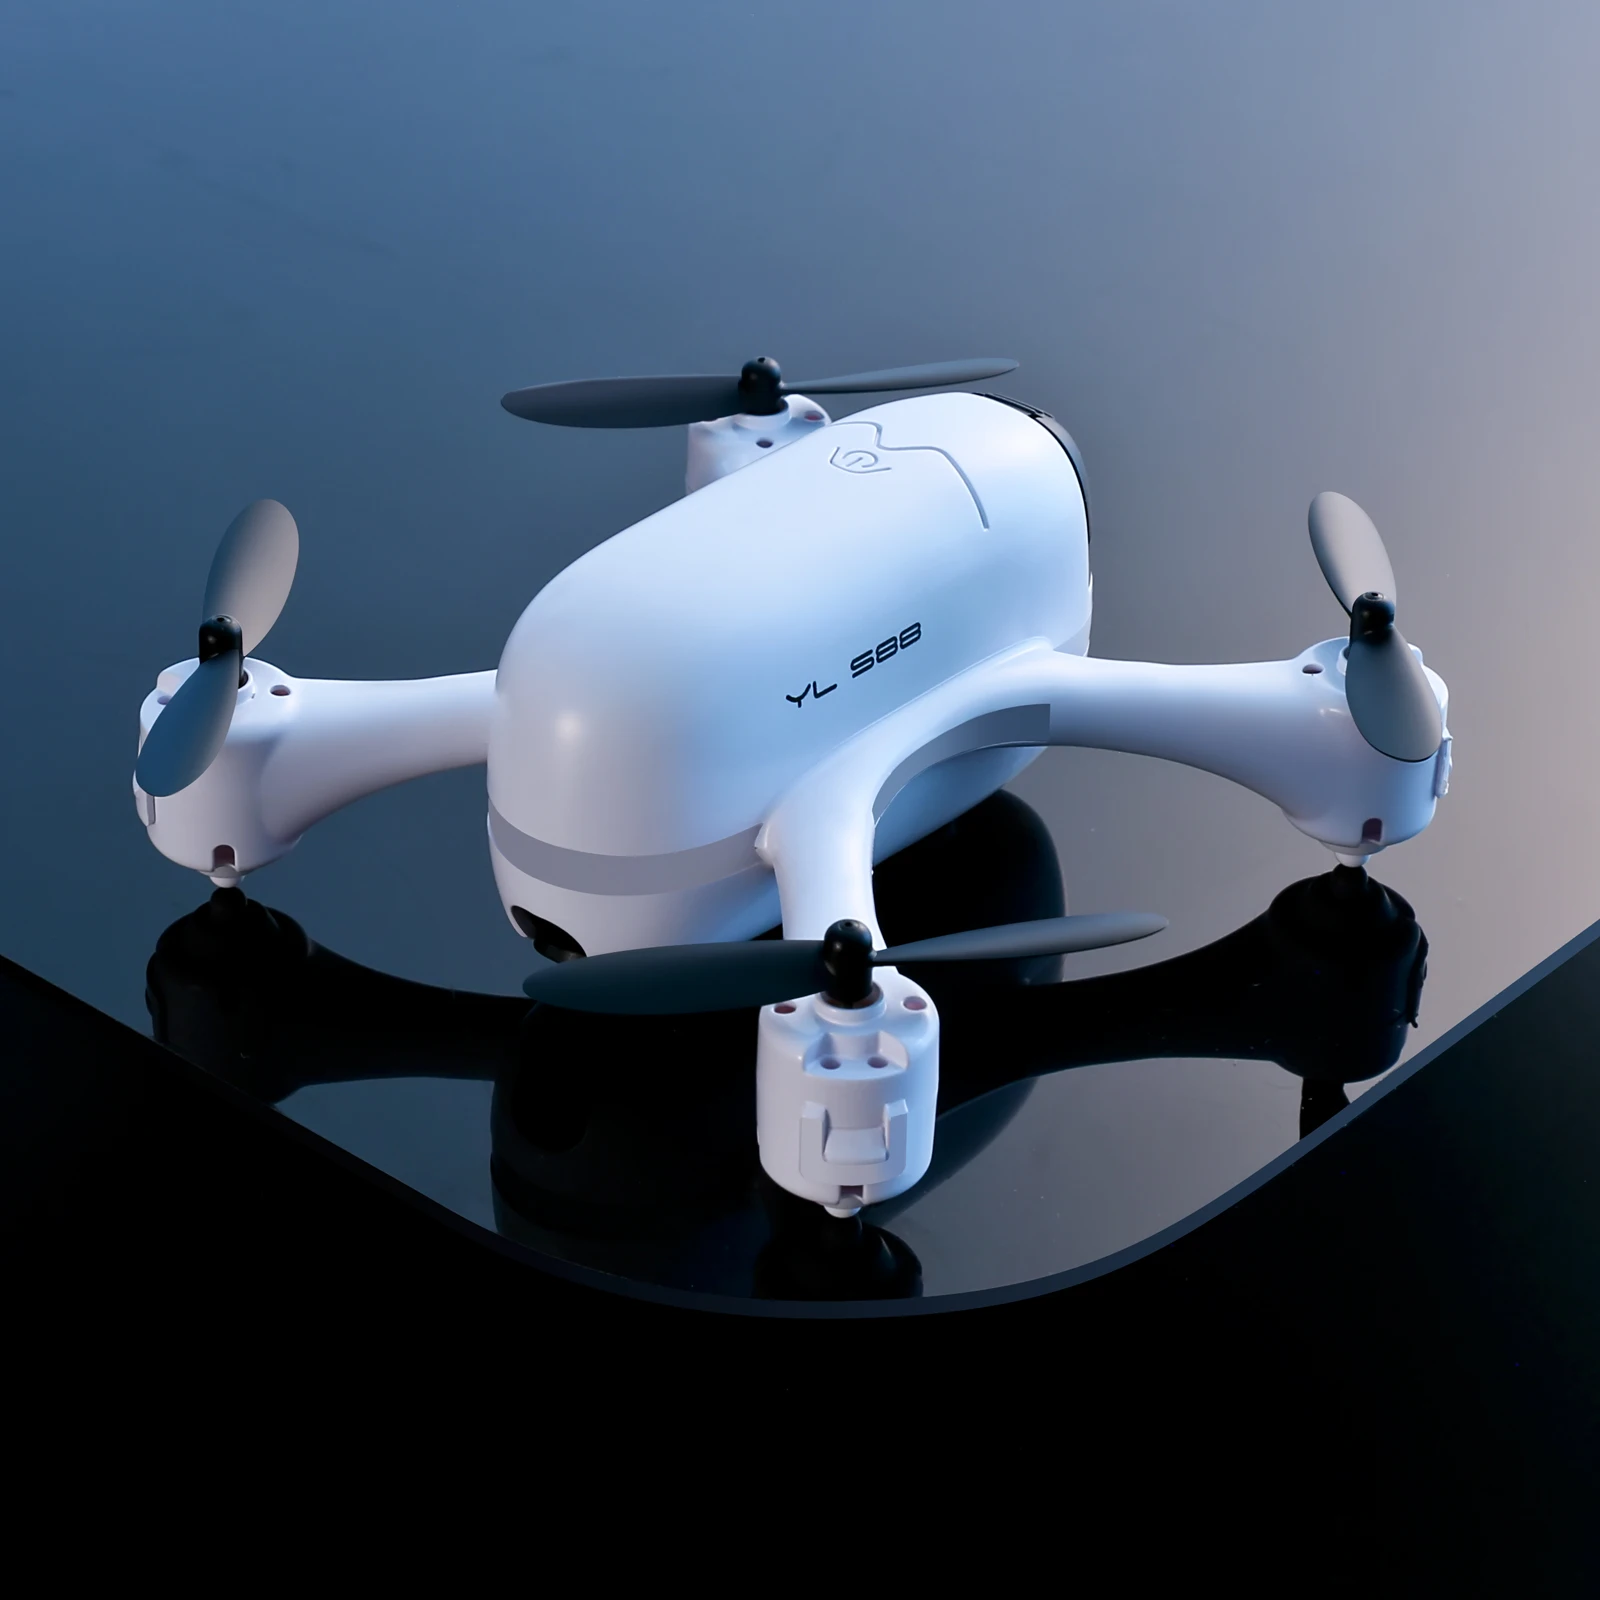 High Quality Cool Light Swarming Remote Control Drones Best 4k Camera Drone Direct Buy China Micro Pocket Drone - Buy Drone,Direct Buy China Product on Alibaba.com